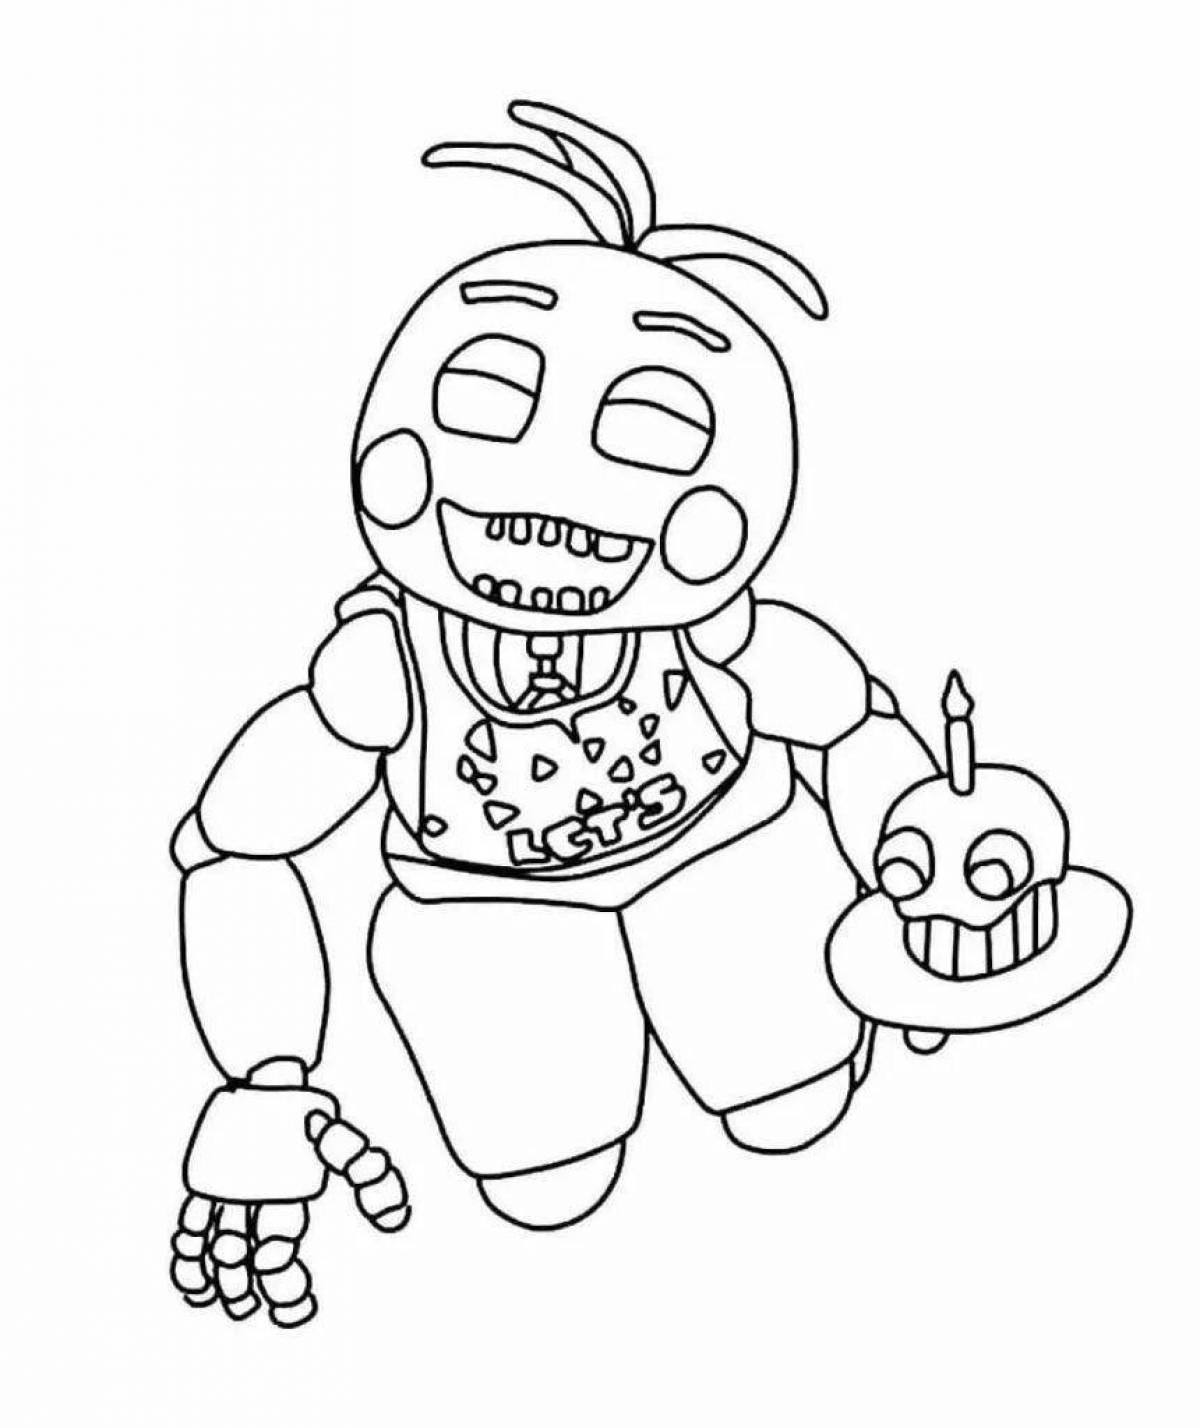 Glowing five nights at freddy's coloring book